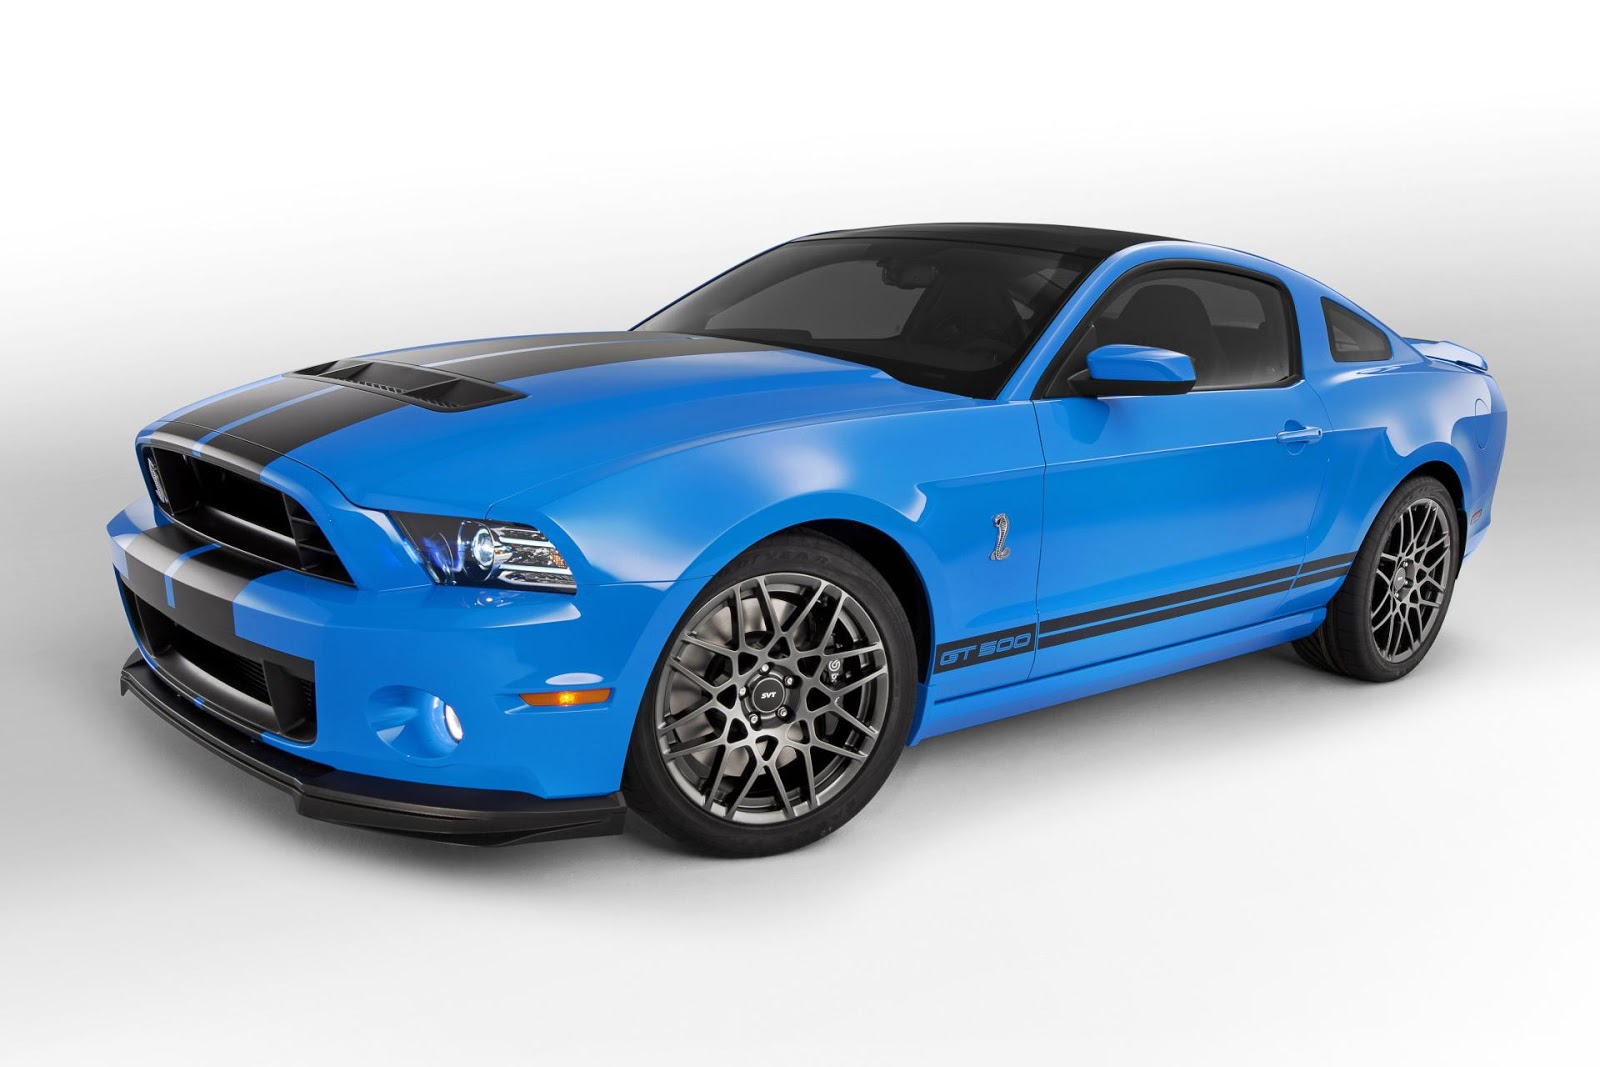 Ford Shelby Mustang GT500 2013 Hottest Car Wallpapers